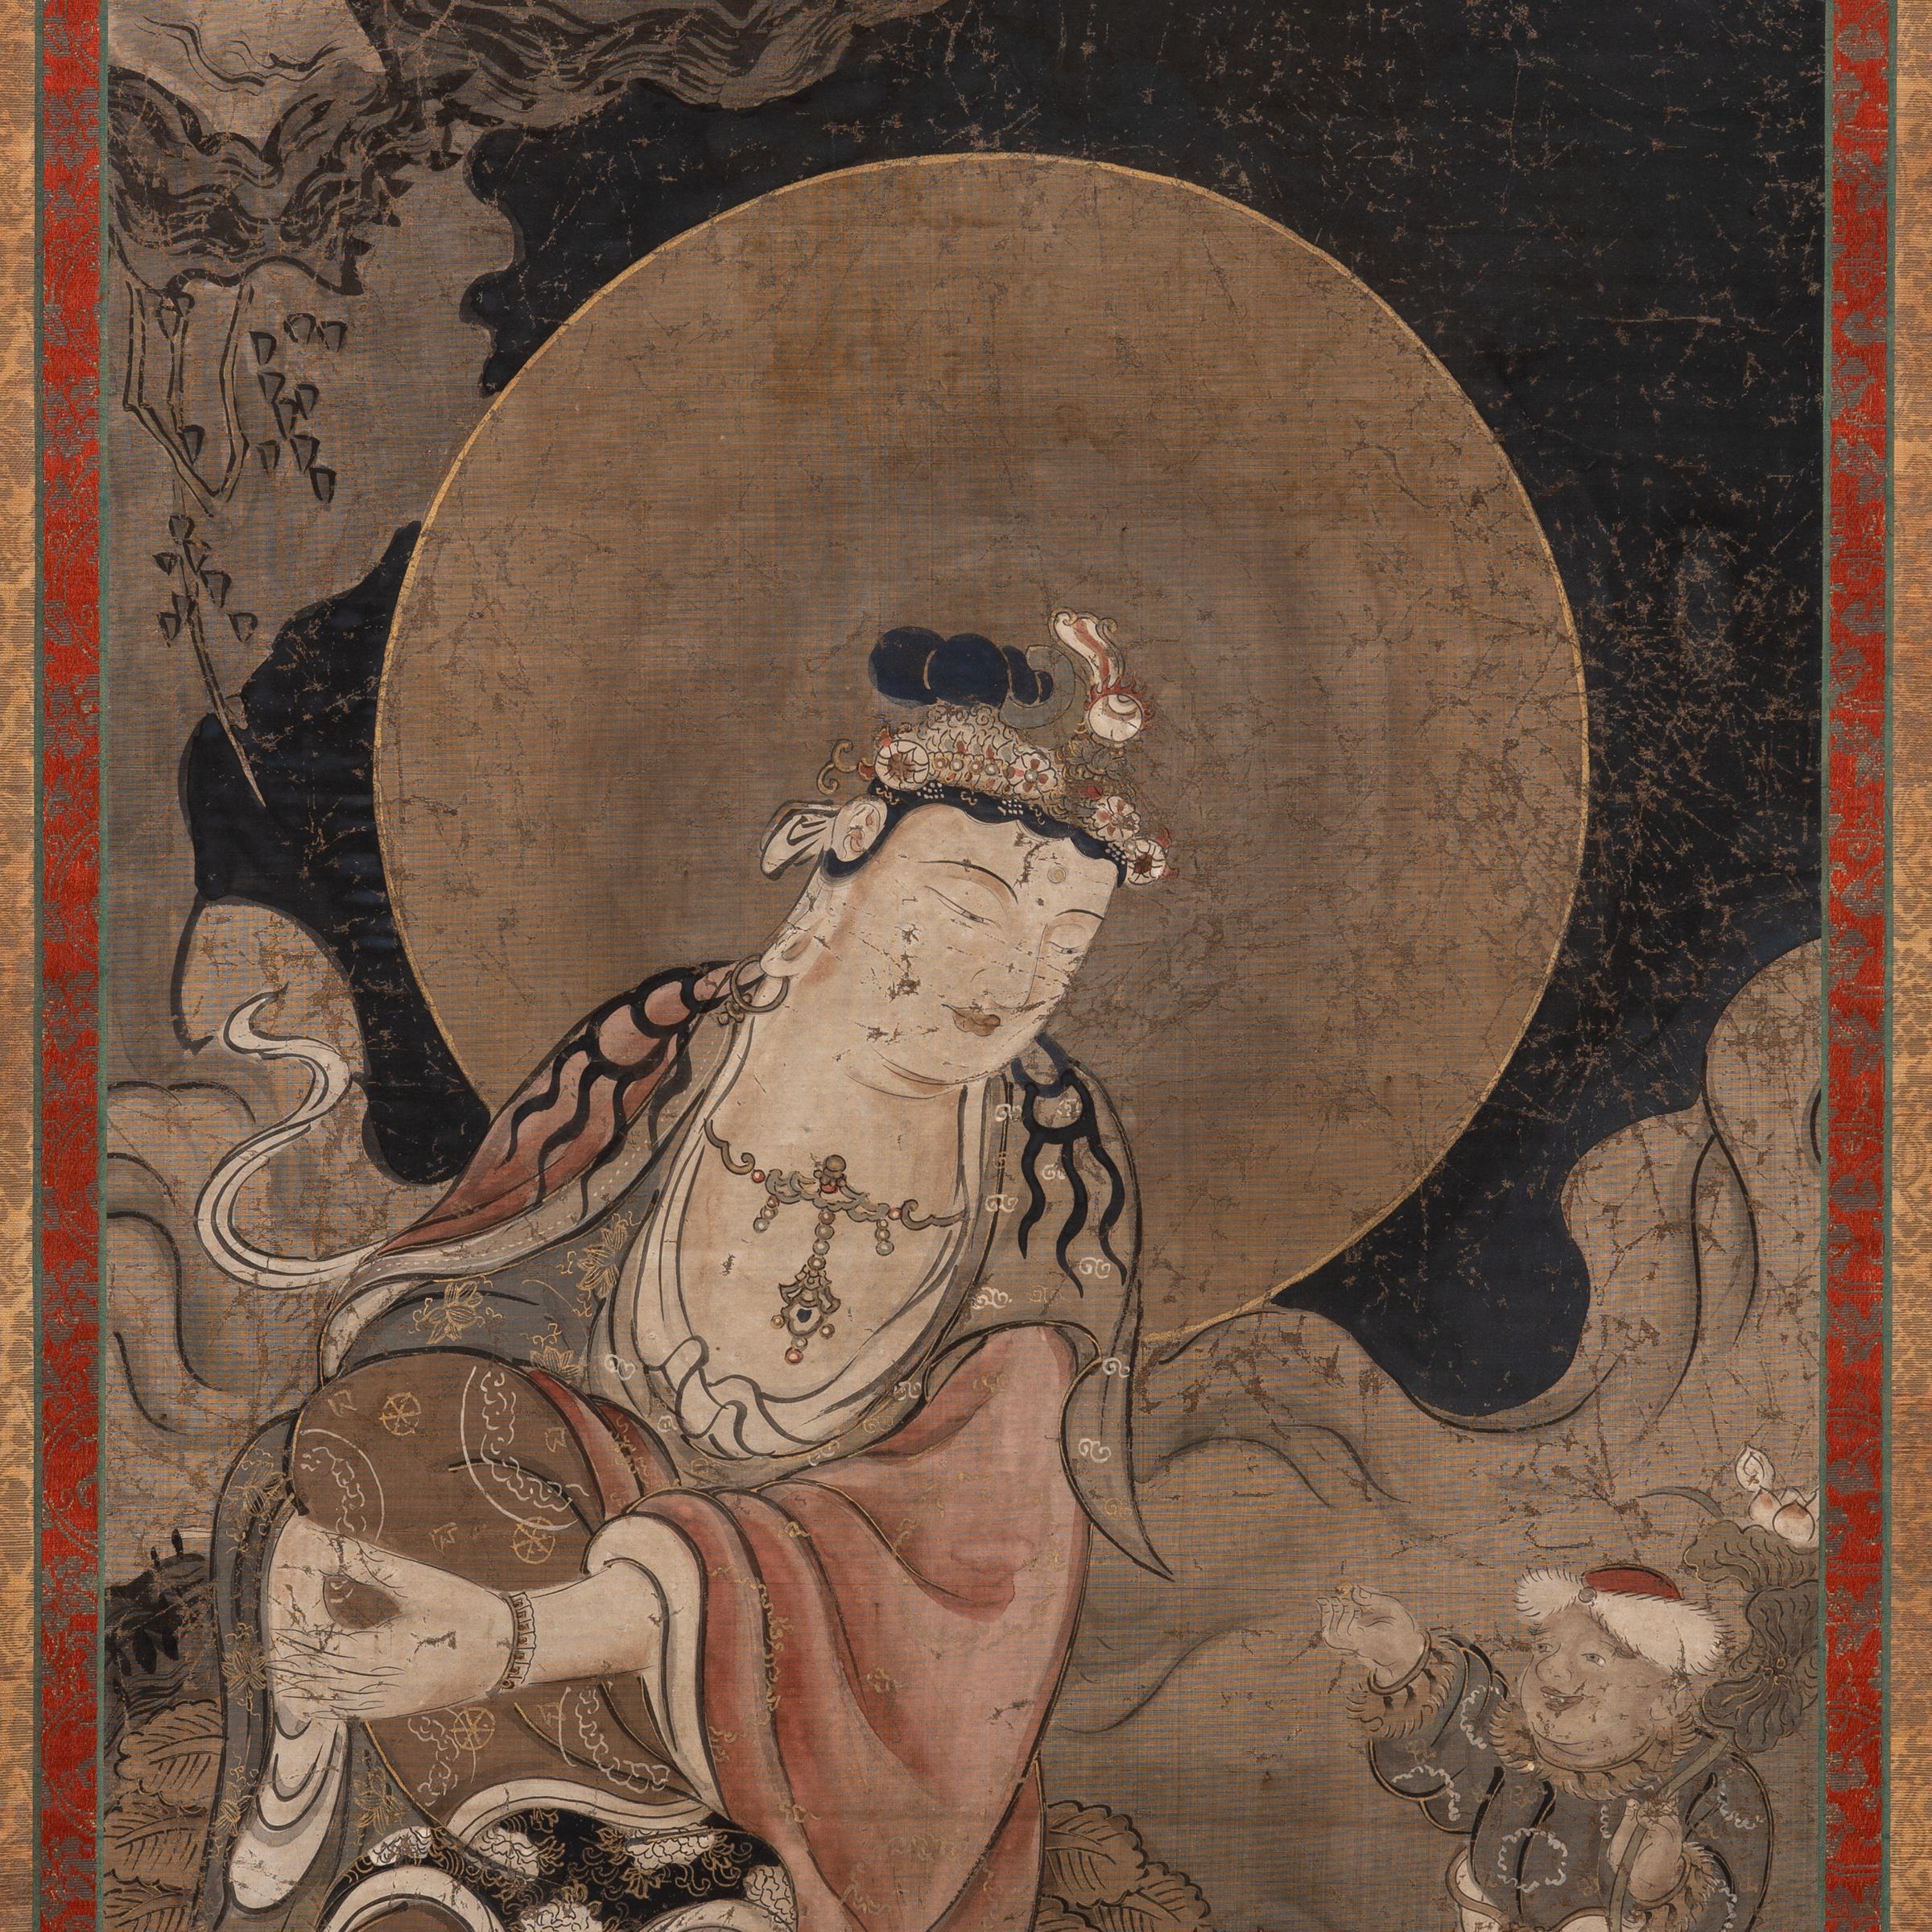 Japanese Hanging Scroll of the Goddess of Mercy, c. 1800 - Folk Art Art by Unknown